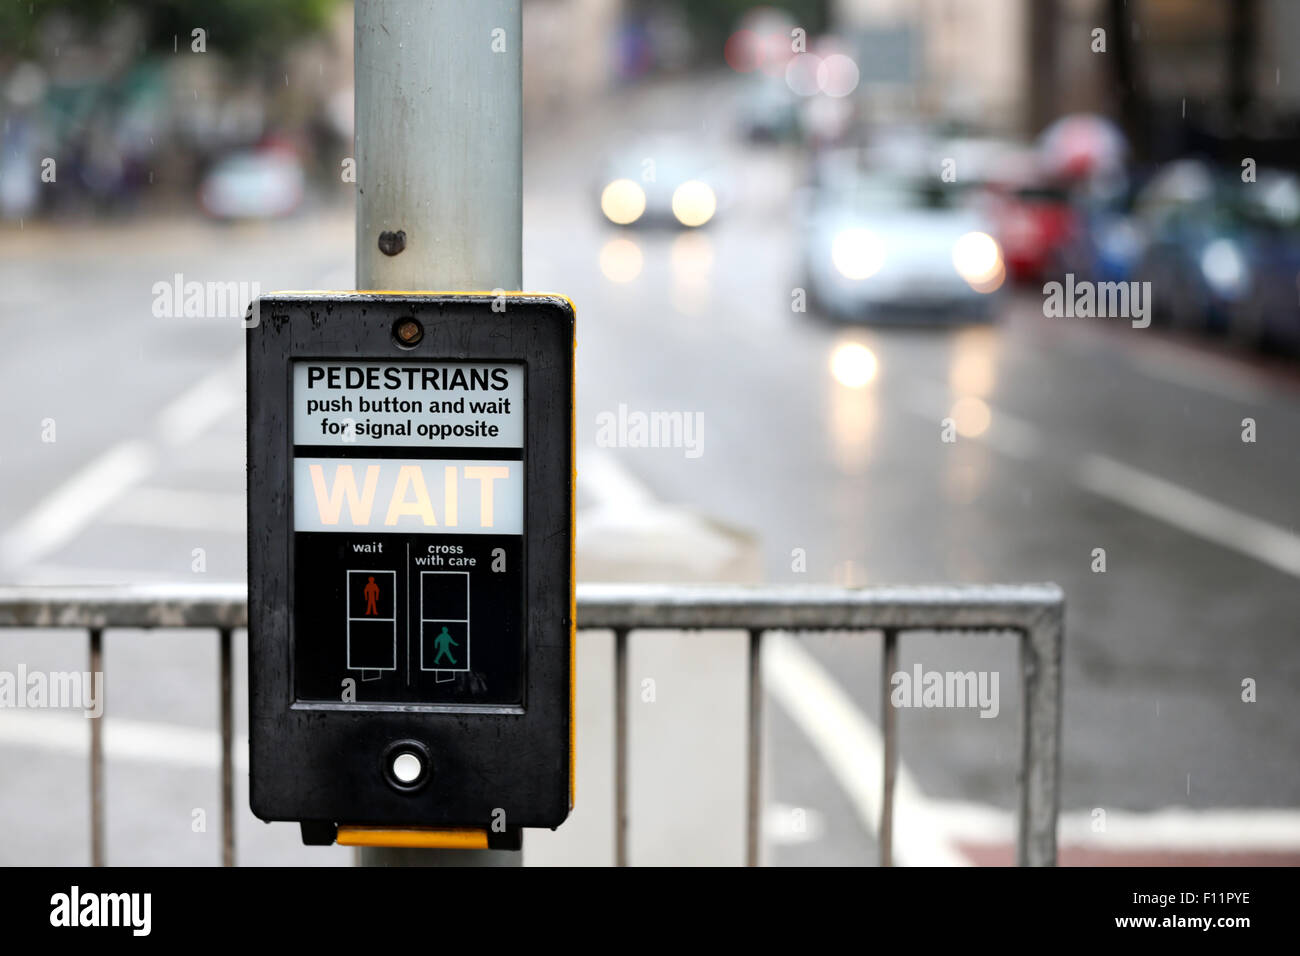 A traffic light pedestrian control on a busy city street. the illuminated street level pedestrian sign says WAIT as vehicles approach the crossing Stock Photo